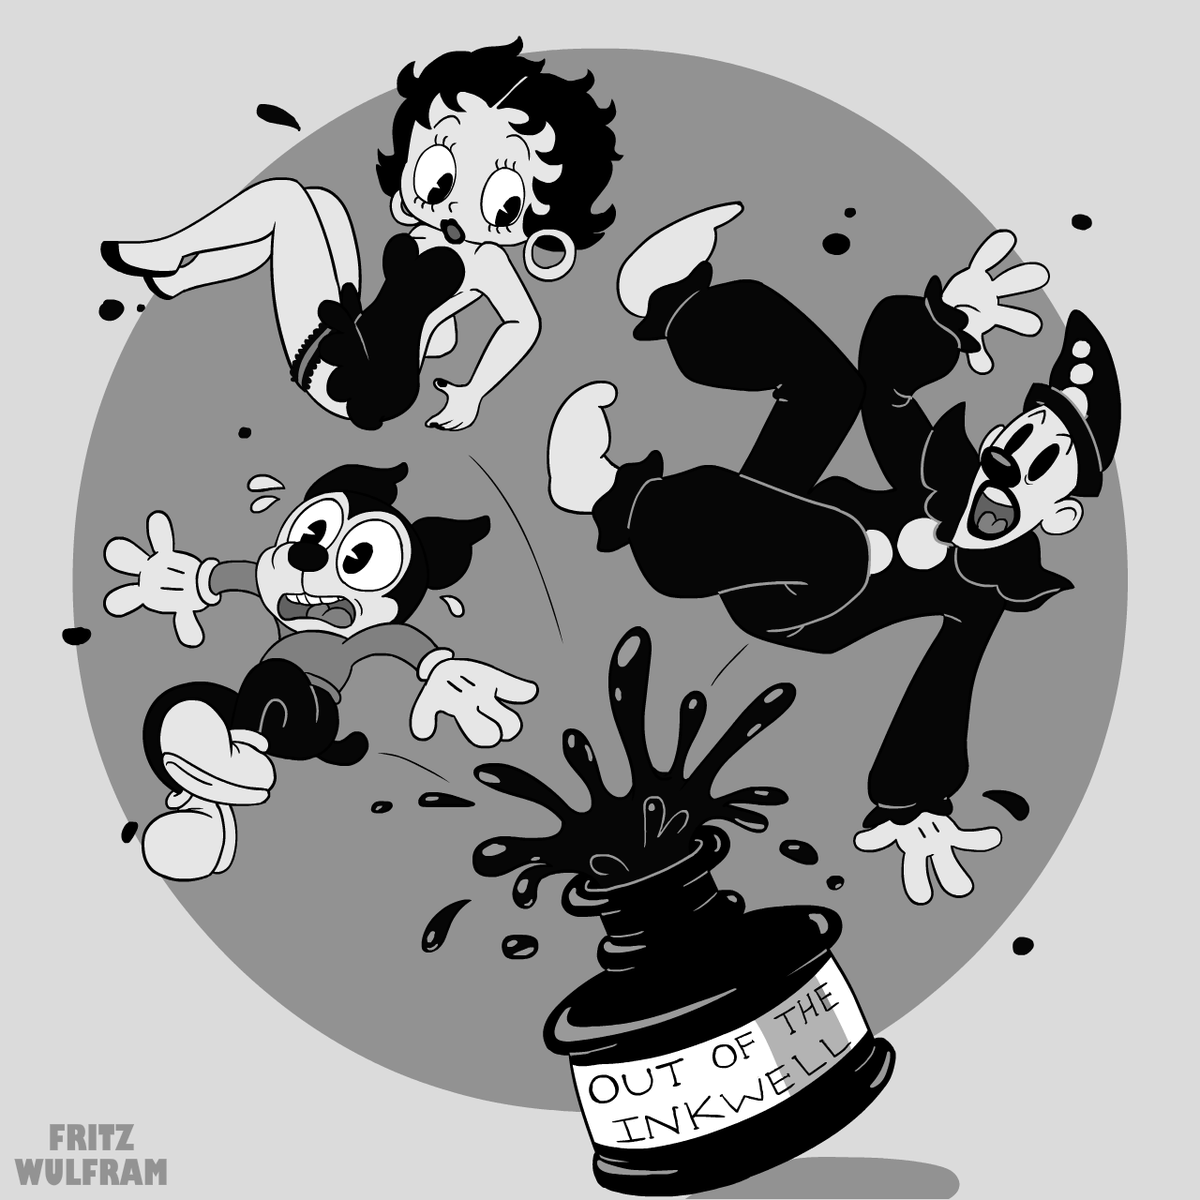 I've always loved the early Betty Boop cartoons, so after trying out an alternative Inktober prompt, I made this! It would be awesome to see this trio onscreen together again...✨

#bettyboop #rubberhose #cartoon #art #fanart #kokotheclown #bimbothedog #fleisherstudios #fritzwulf